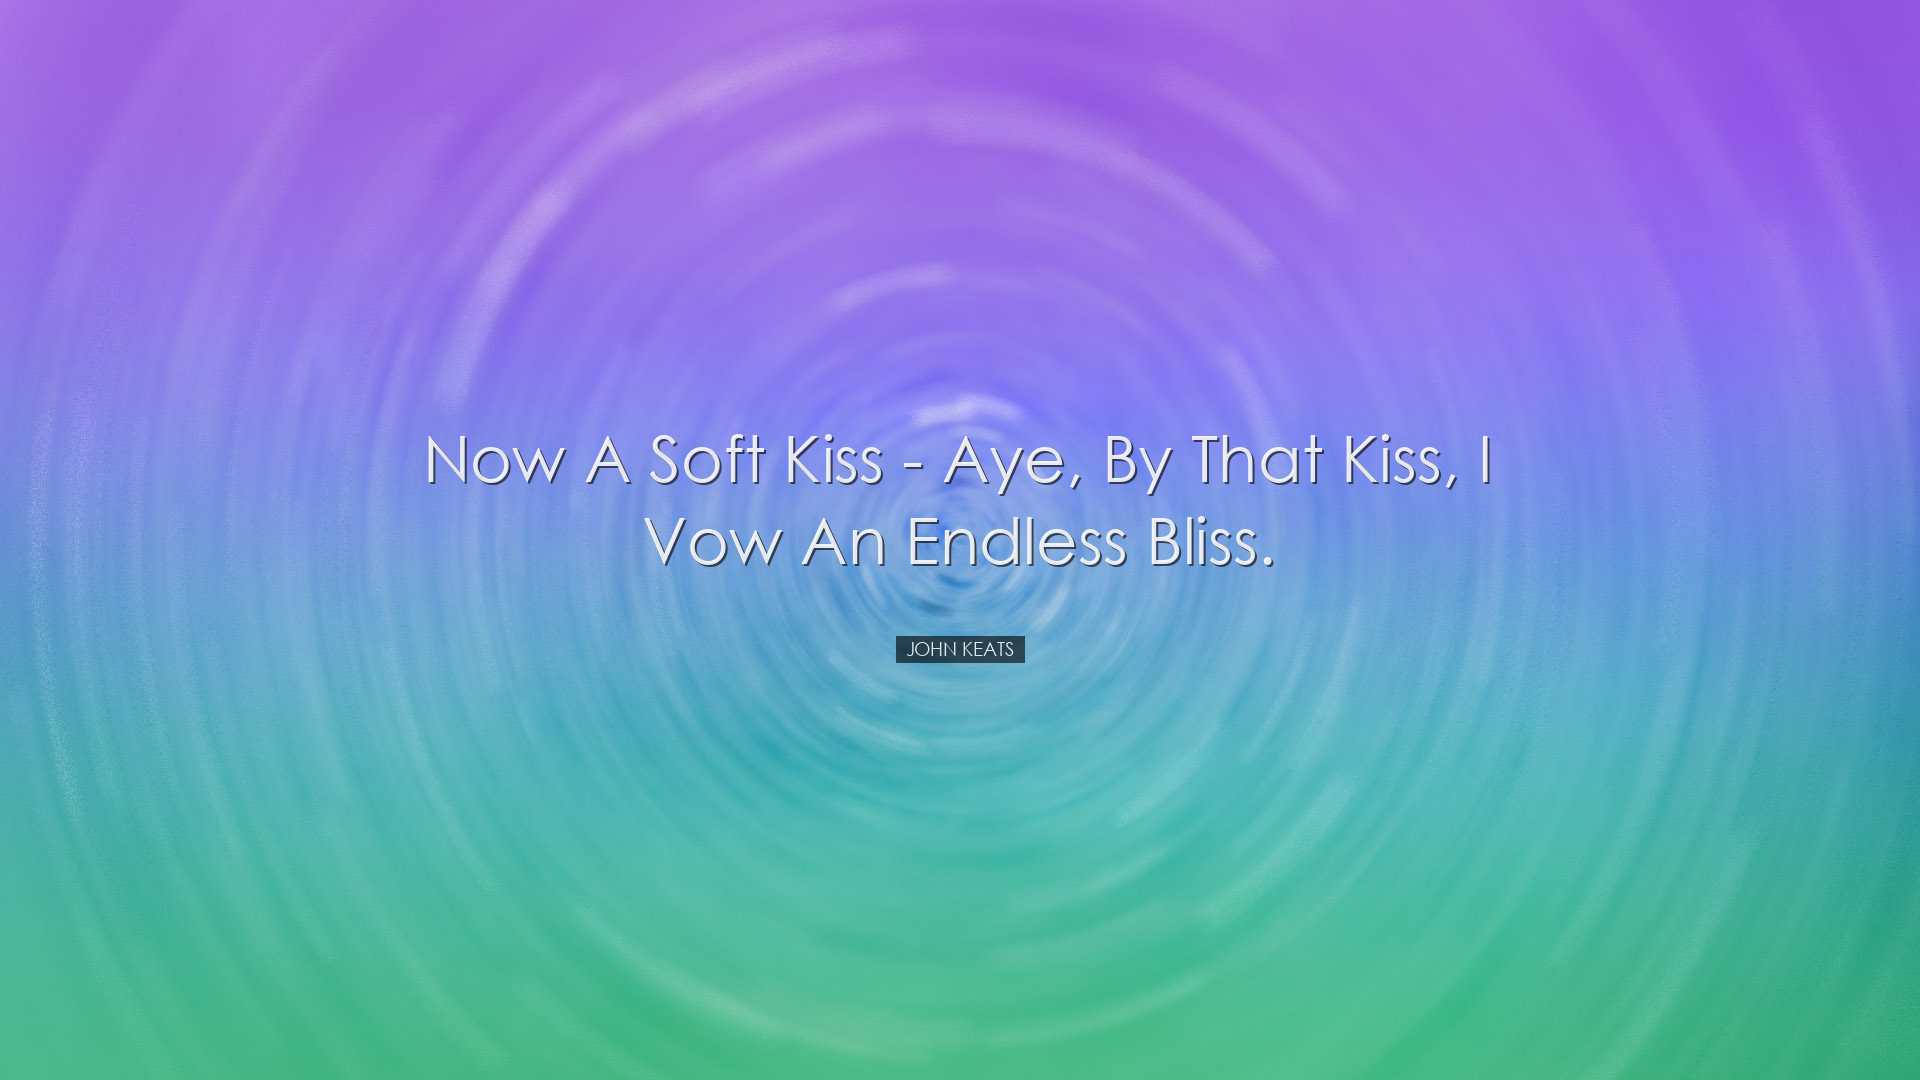 Now a soft kiss - Aye, by that kiss, I vow an endless bliss. - Joh